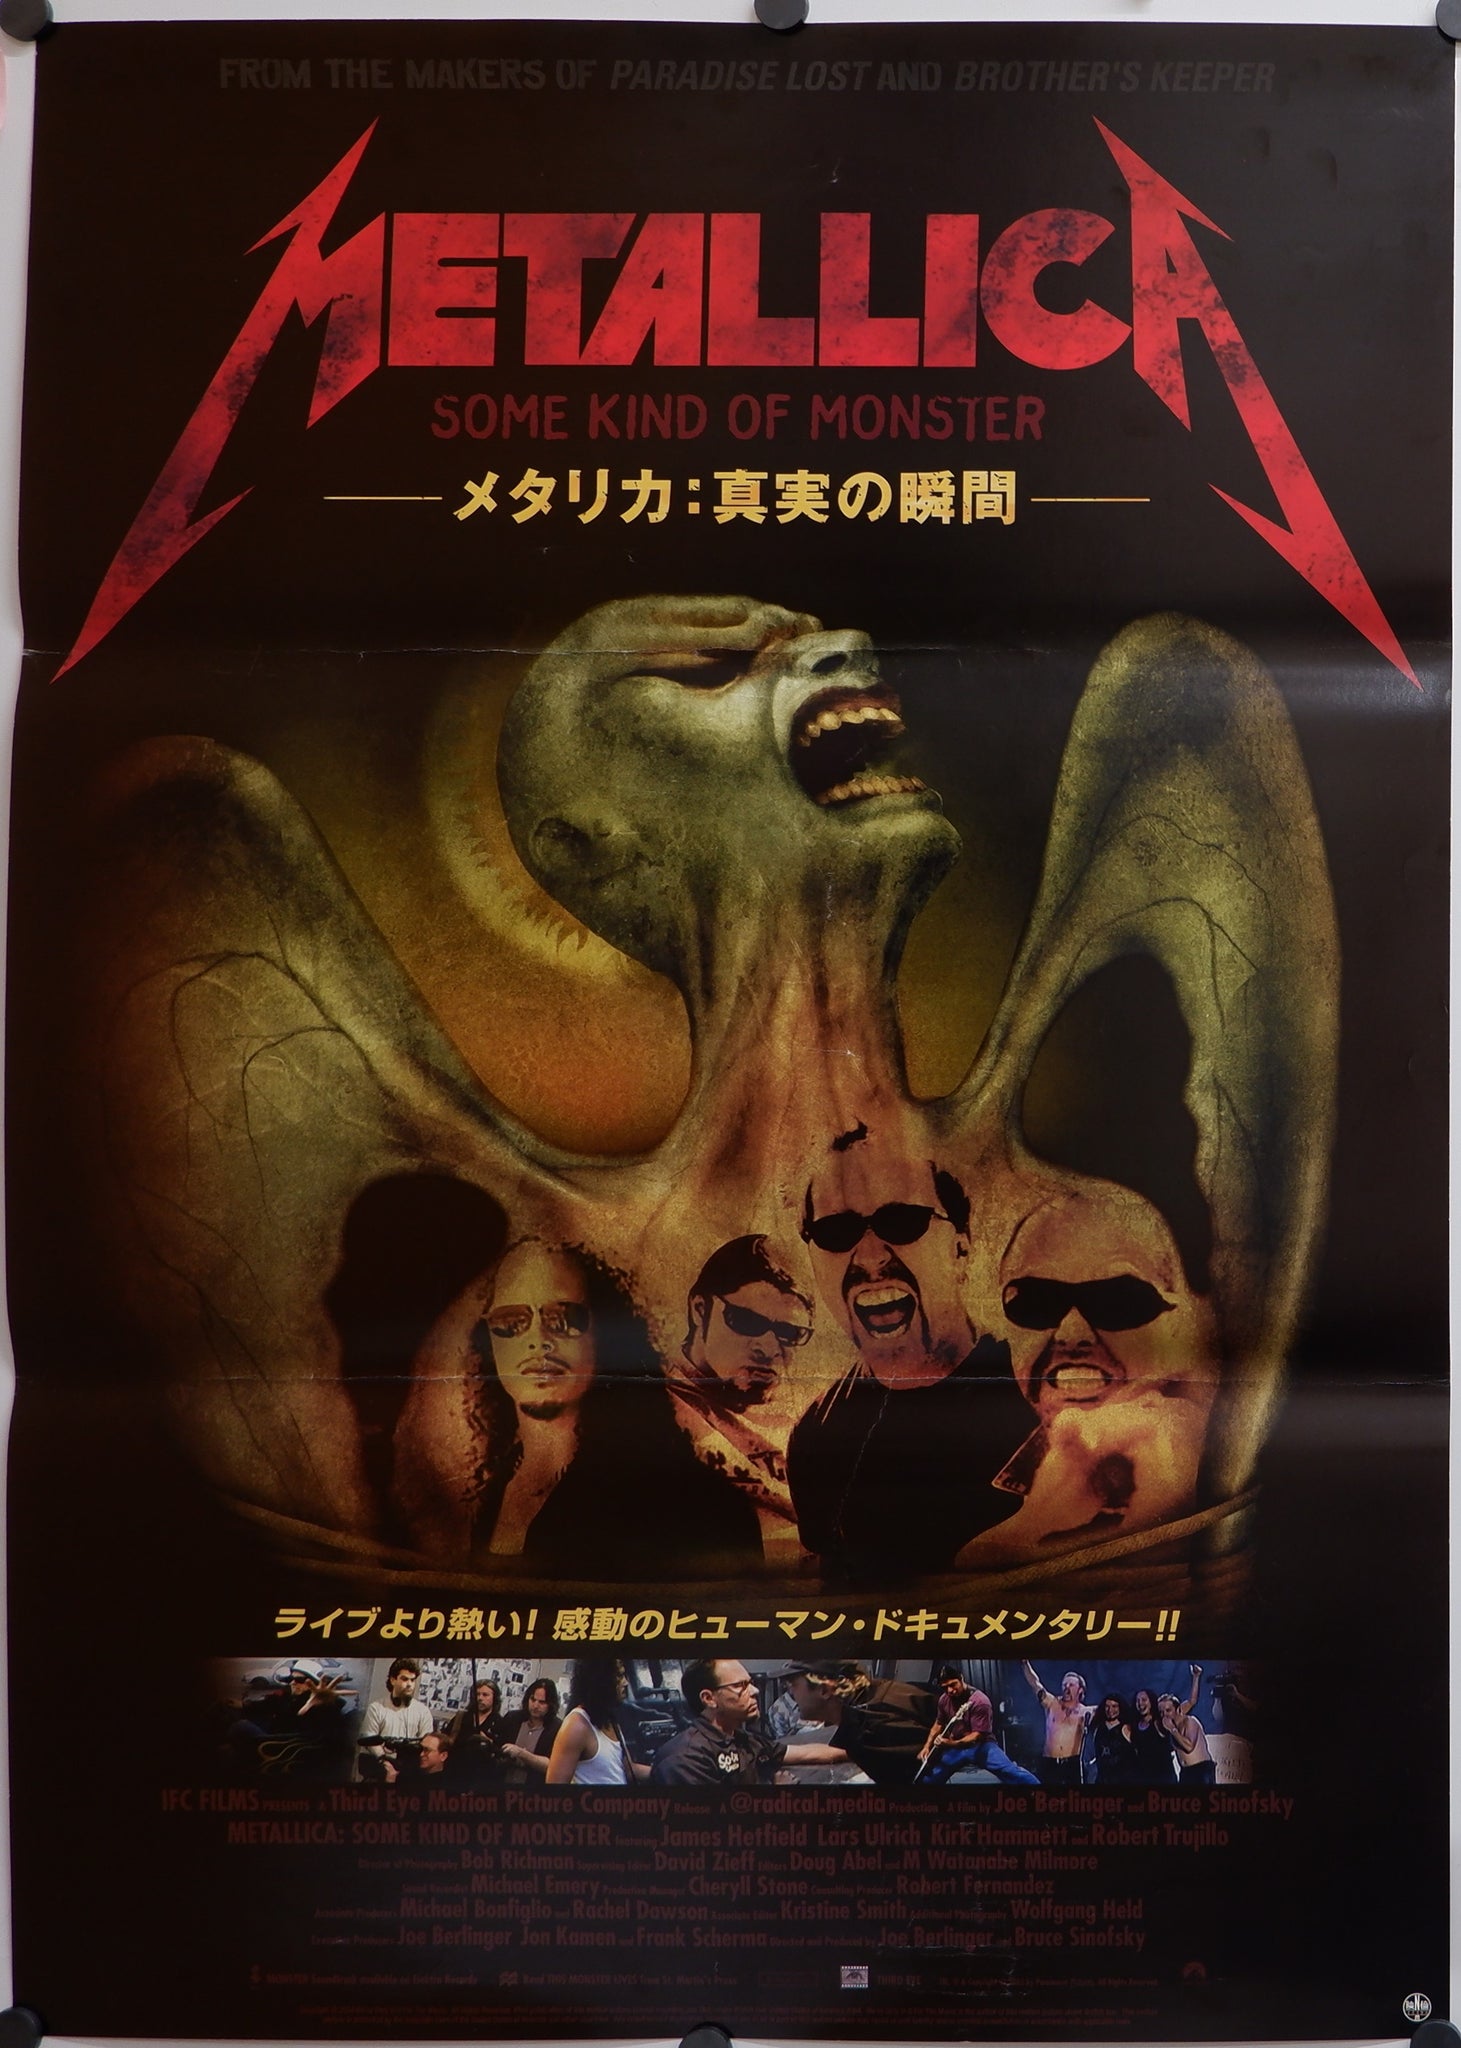 Kind　Shop　Metallica:　Pos　Release　Some　of　Japanese　Monster